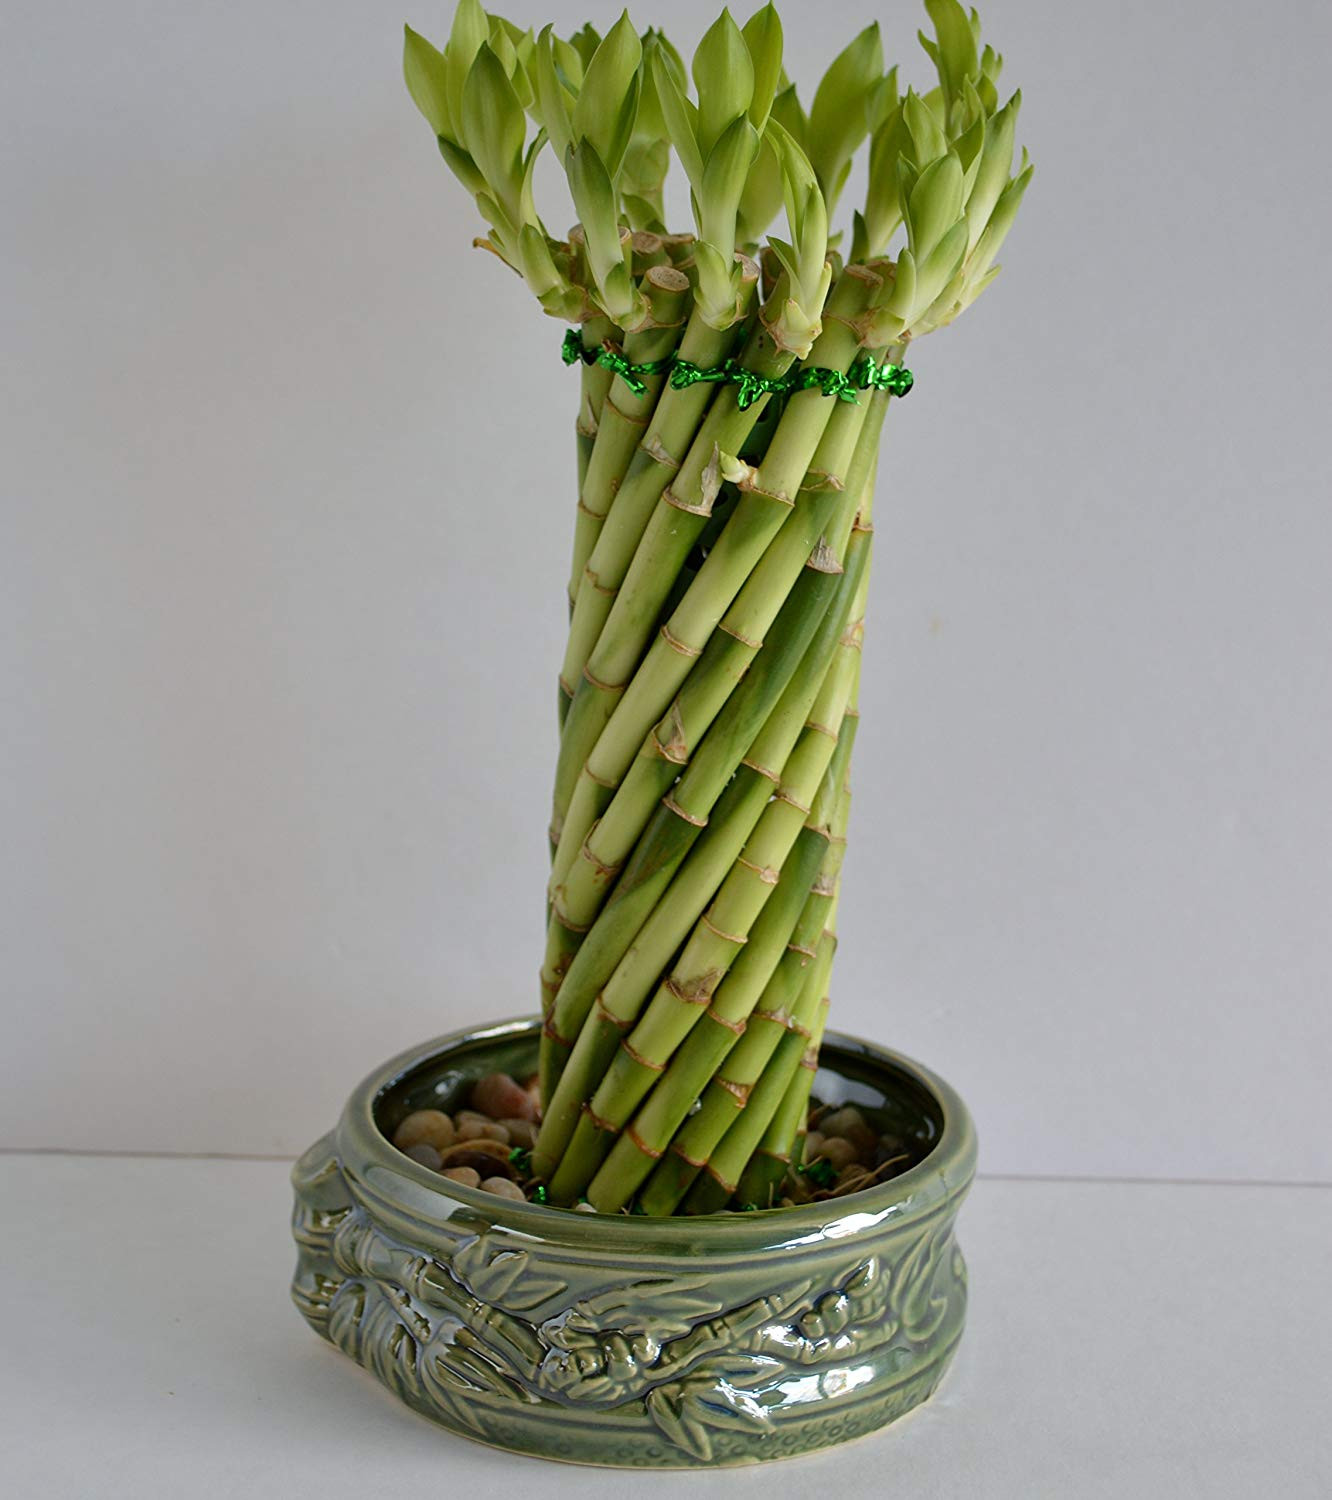 21 Great Bamboo Plant with Elephant Vase 2024 free download bamboo plant with elephant vase of amazon com lucky bamboo twisted design 8 10 set with a handmade inside amazon com lucky bamboo twisted design 8 10 set with a handmade ceramic vase from jm